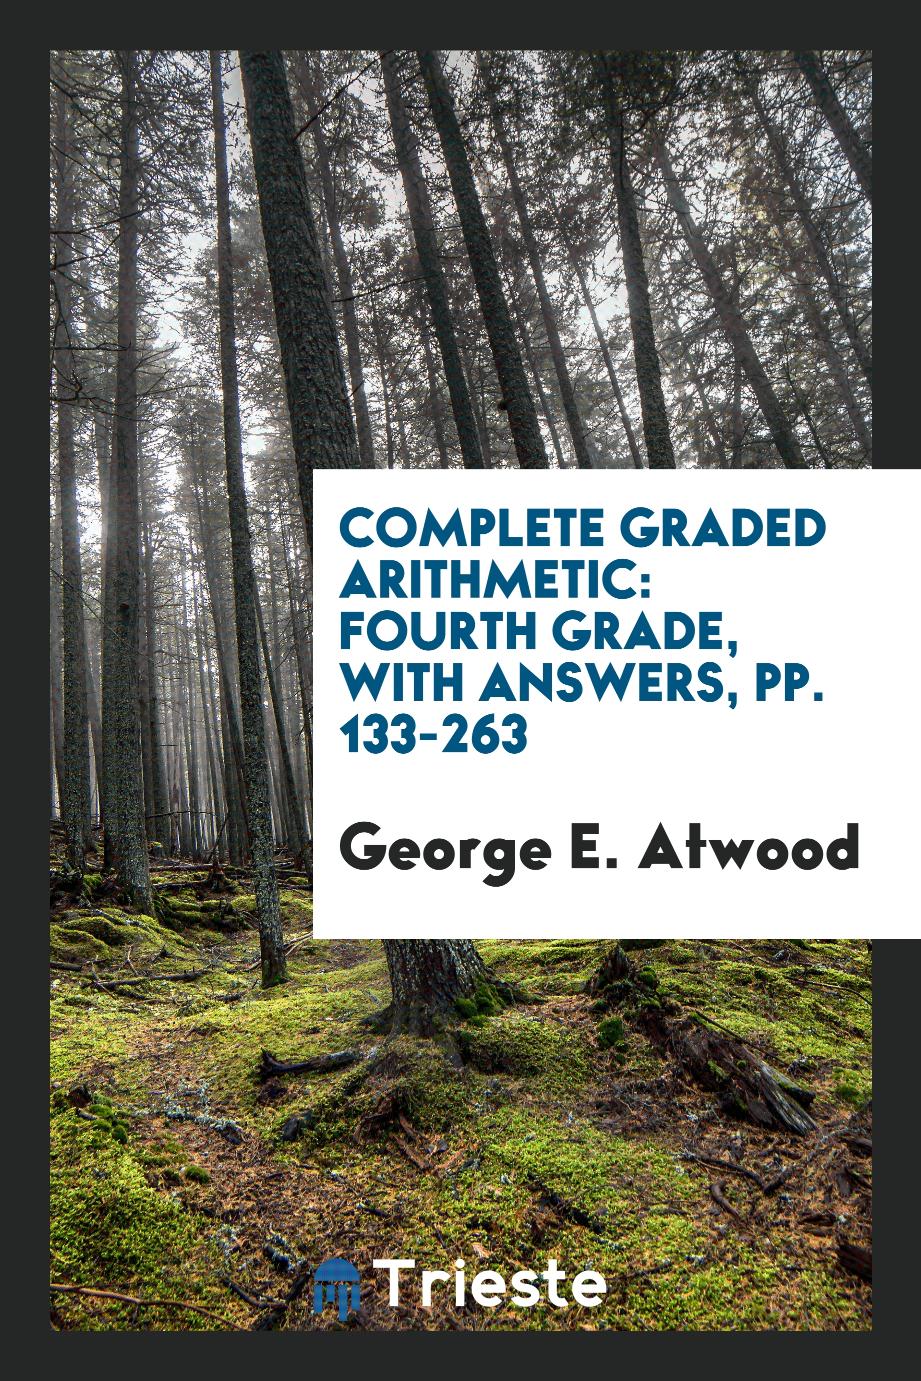 Complete Graded Arithmetic: Fourth Grade, with Answers, pp. 133-263